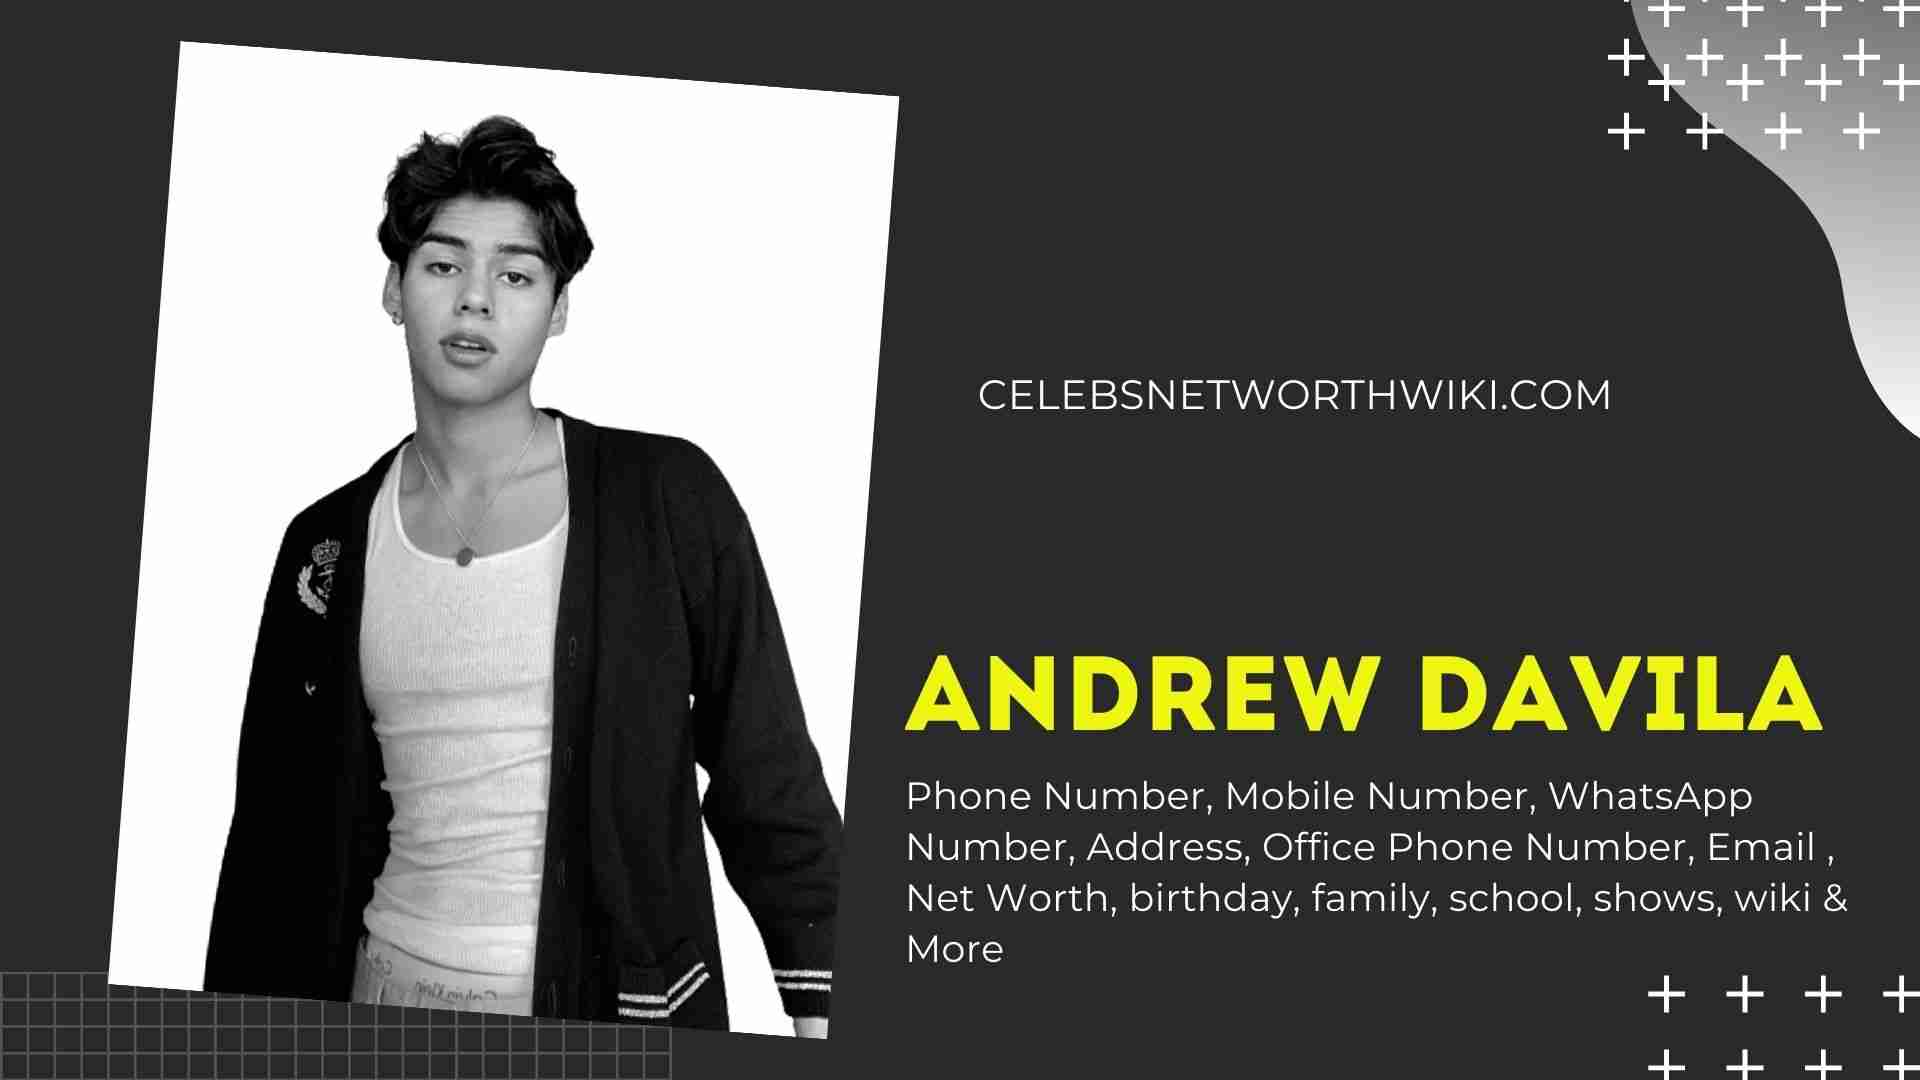 Andrew Davila Phone Number Texting Number Contact Number Mobile